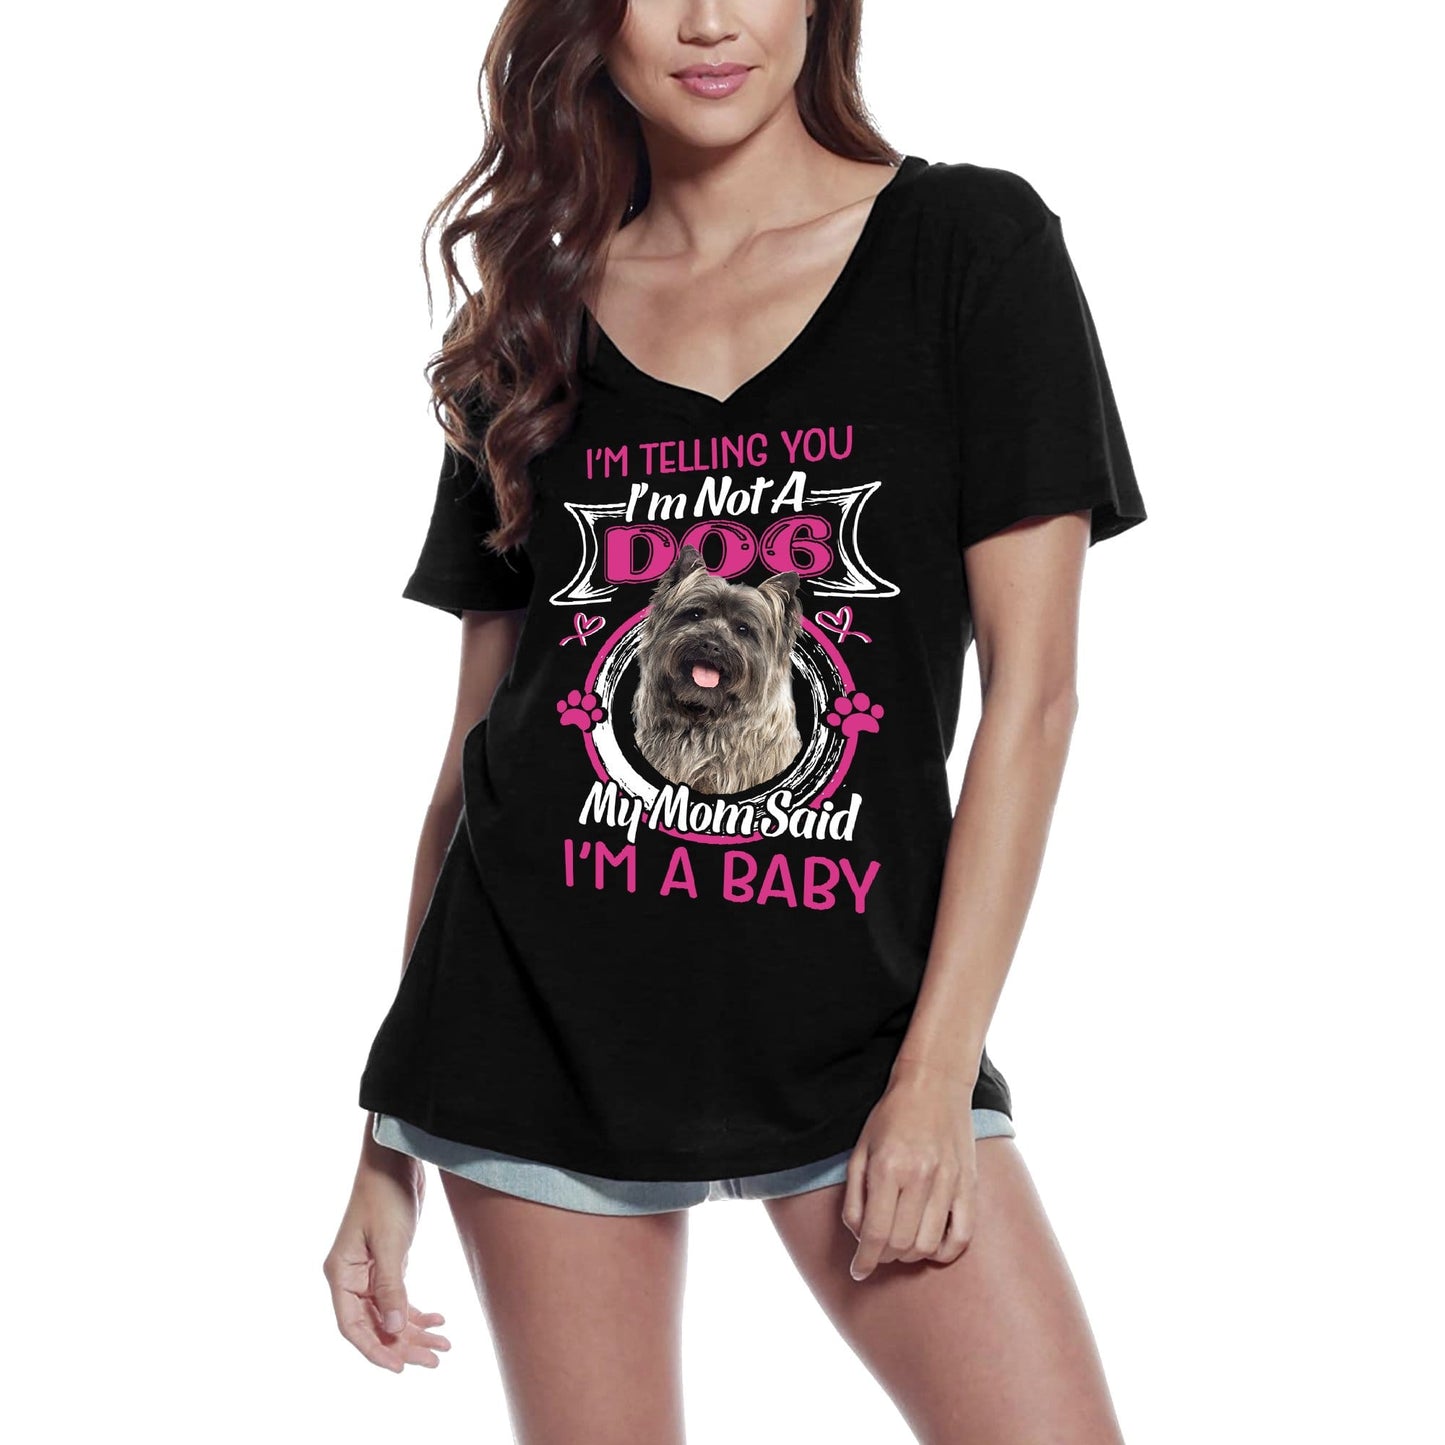 ULTRABASIC Women's T-Shirt I'm Telling You I'm Not a Cairn Terrier - My Mom Said I'm a Baby - Cute Puppy Dog Lover Tee Shirt